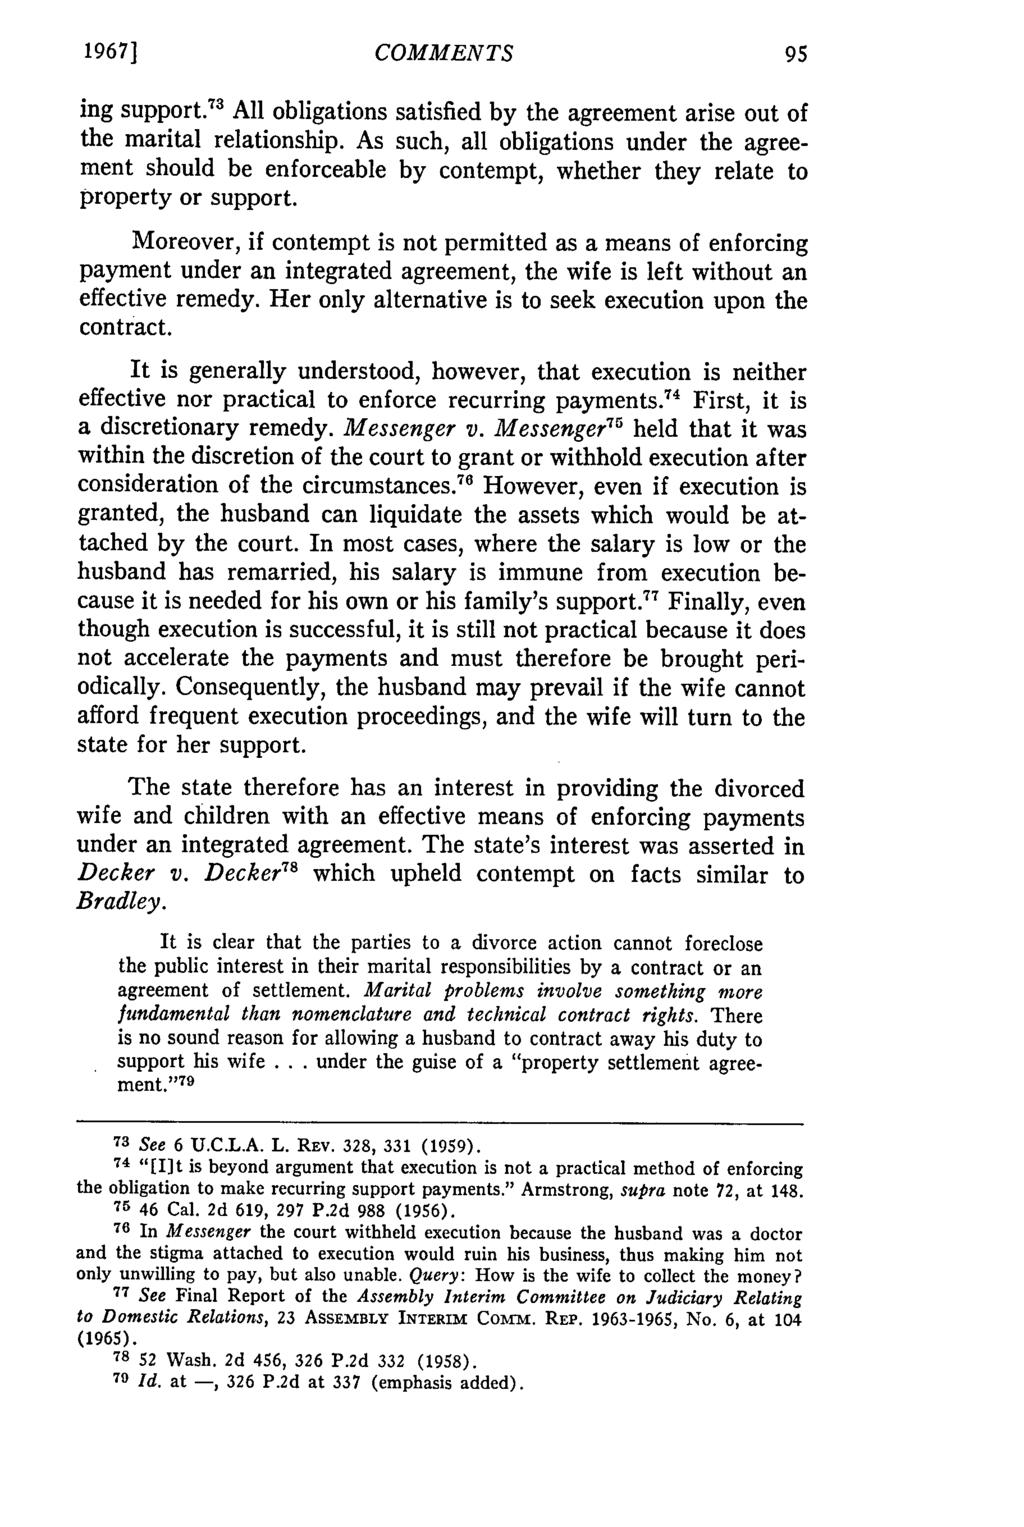 1967] COMMENTS ing support. 7 3 All obligations satisfied by the agreement arise out of the marital relationship.